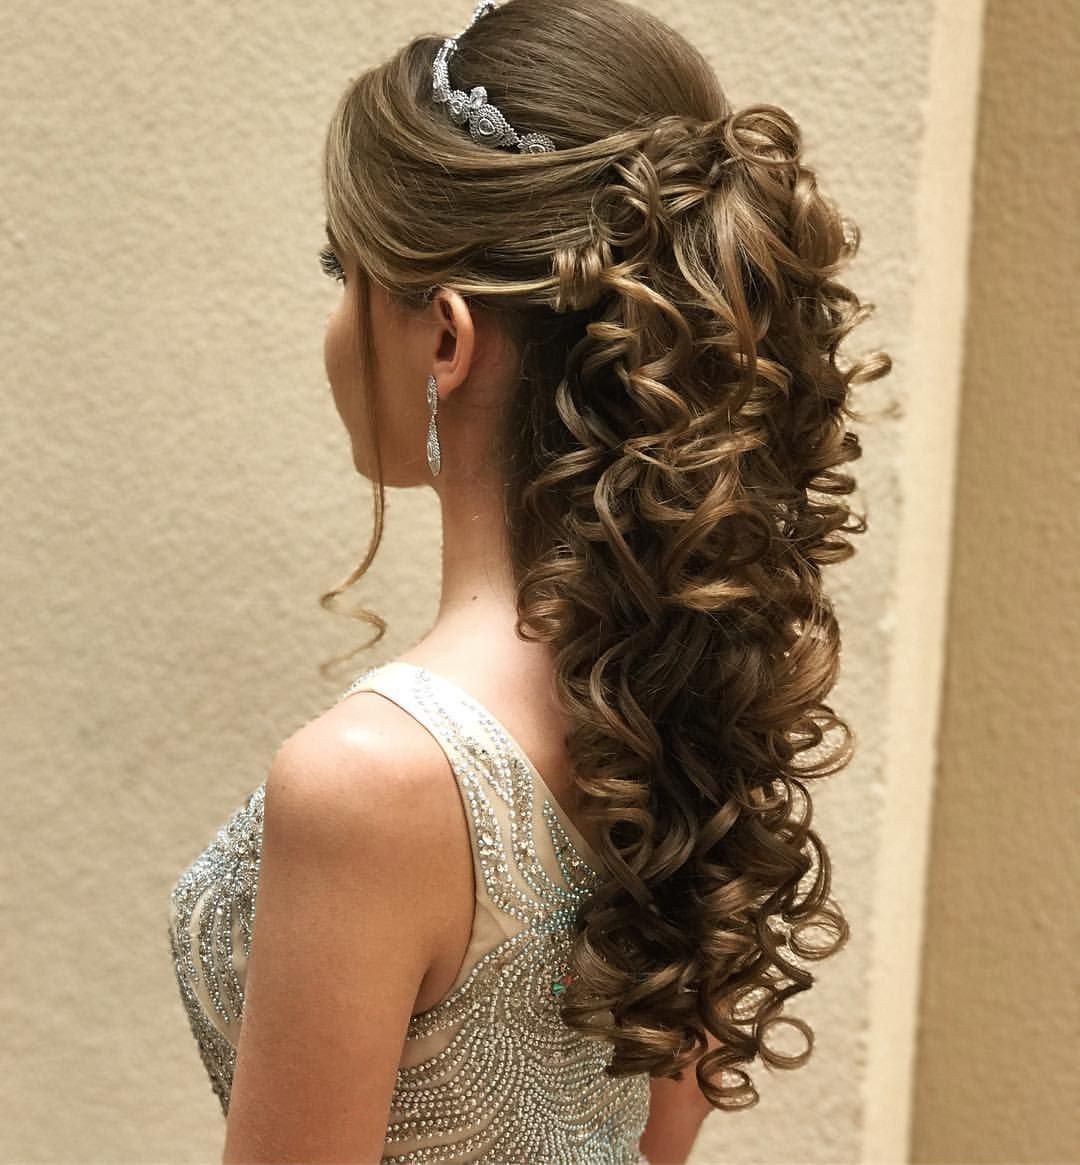 Quinceanera Hairstyles For Long Hair
 Pin by Coco on Wedding hairstyle ideas